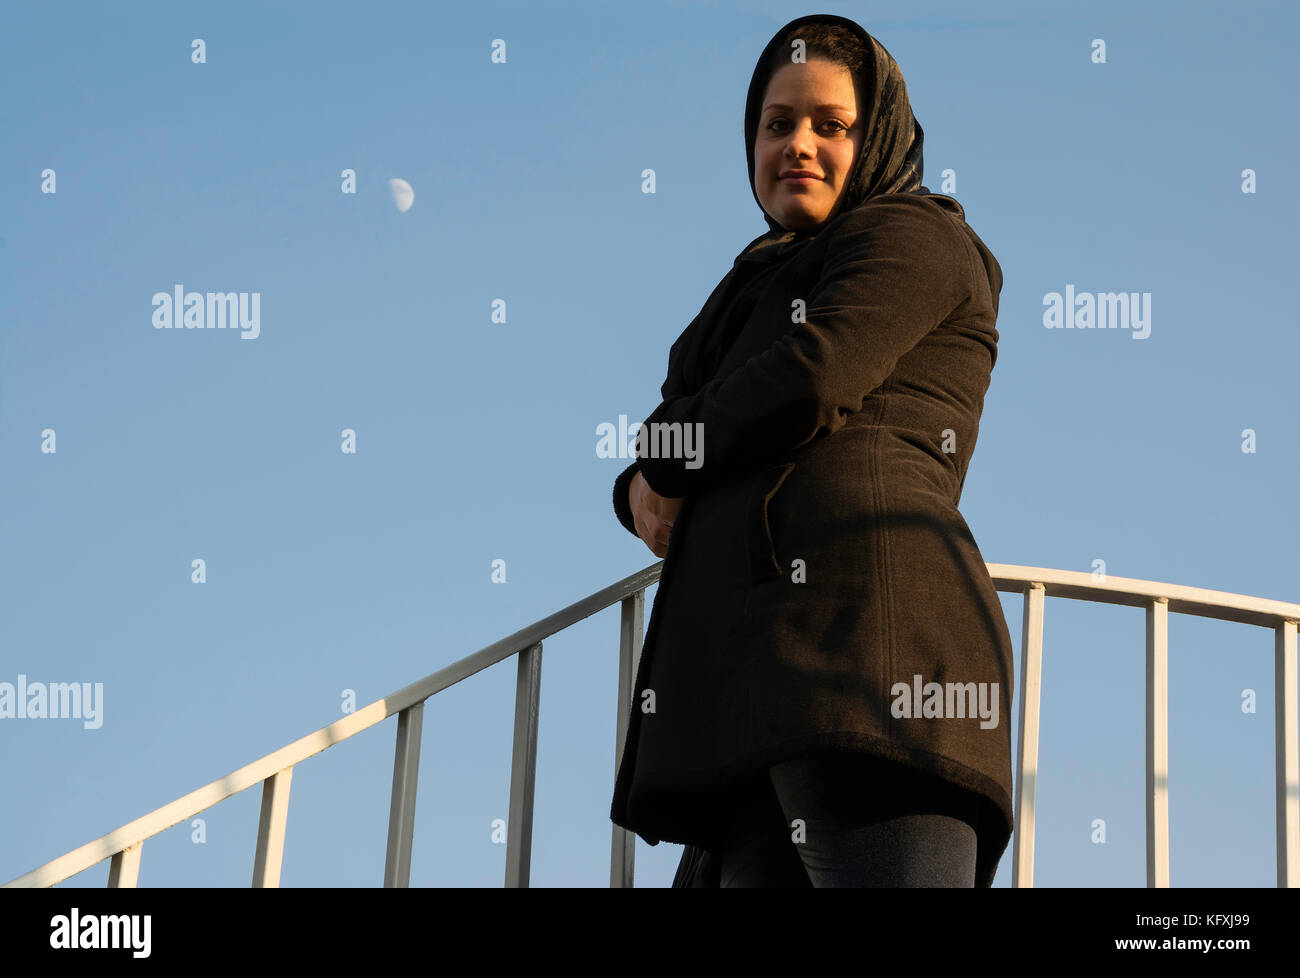 Portrait of a Muslim Woman with Golden Sunlight on Her Face in Front of Blue Sky with Moon Planet at Background. Stock Photo